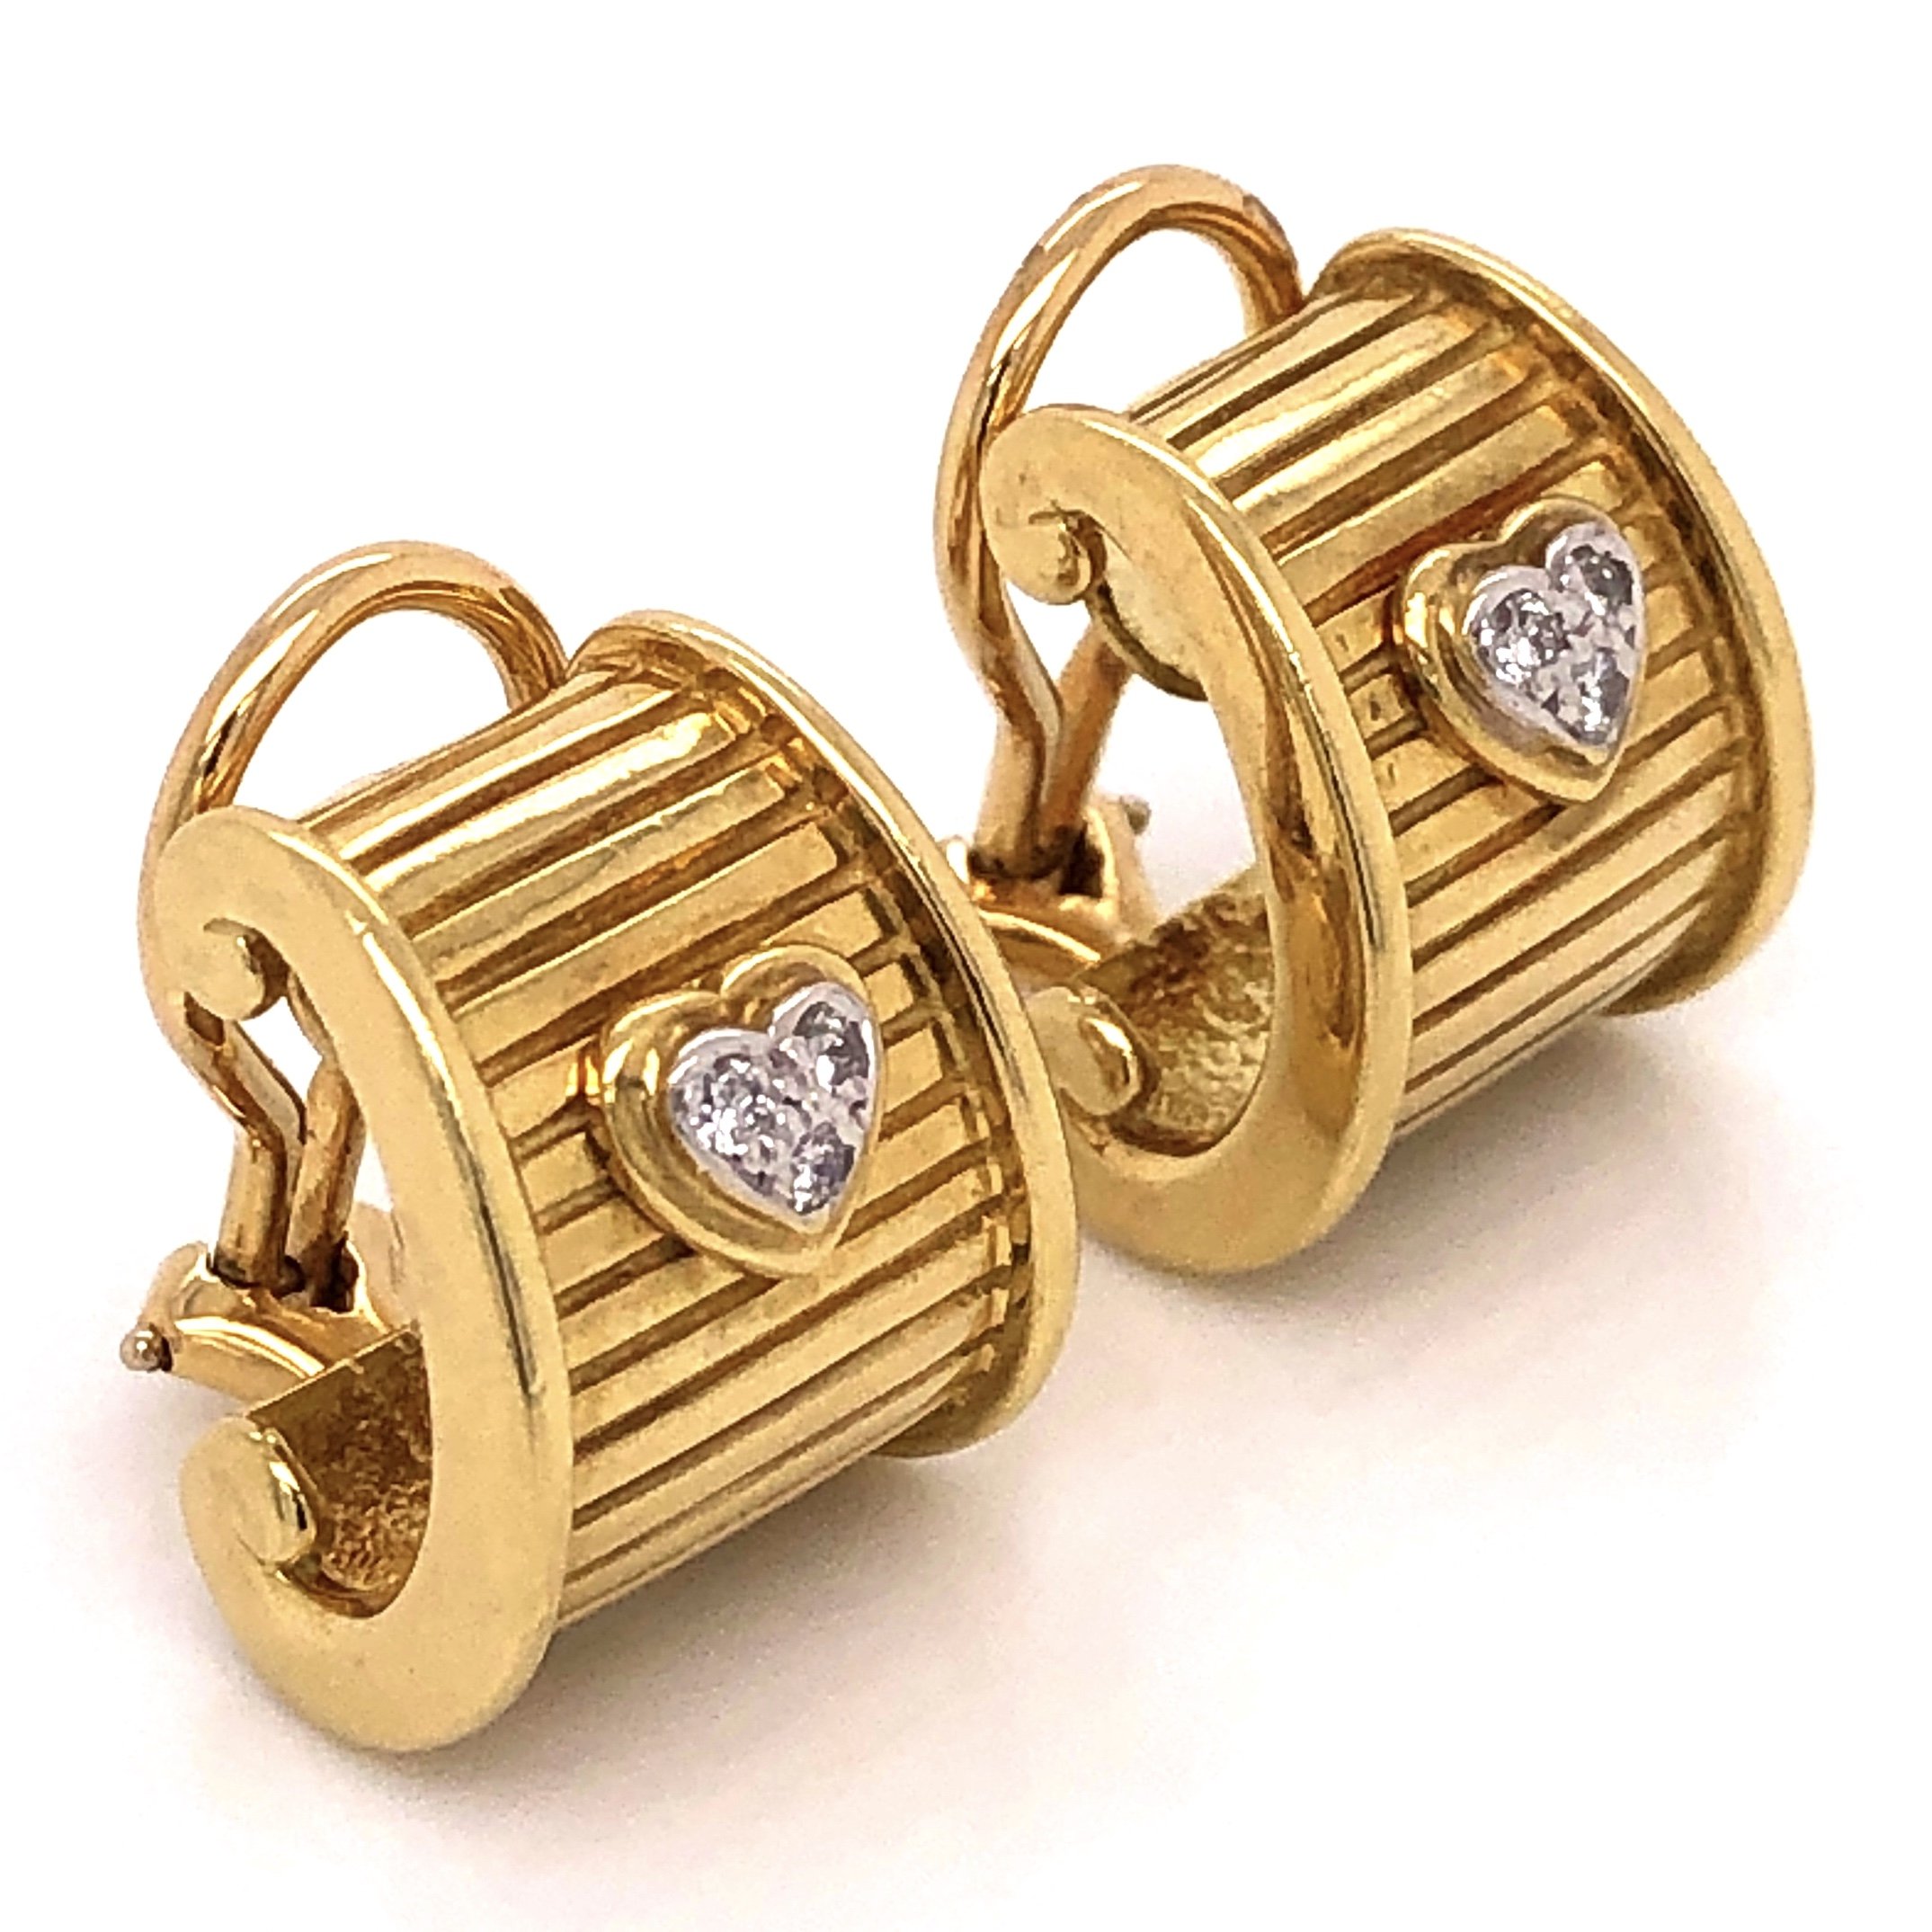 18K Yellow Gold RG DWK Diamond Heart Earrings .12tcw 15.9g with French Clips